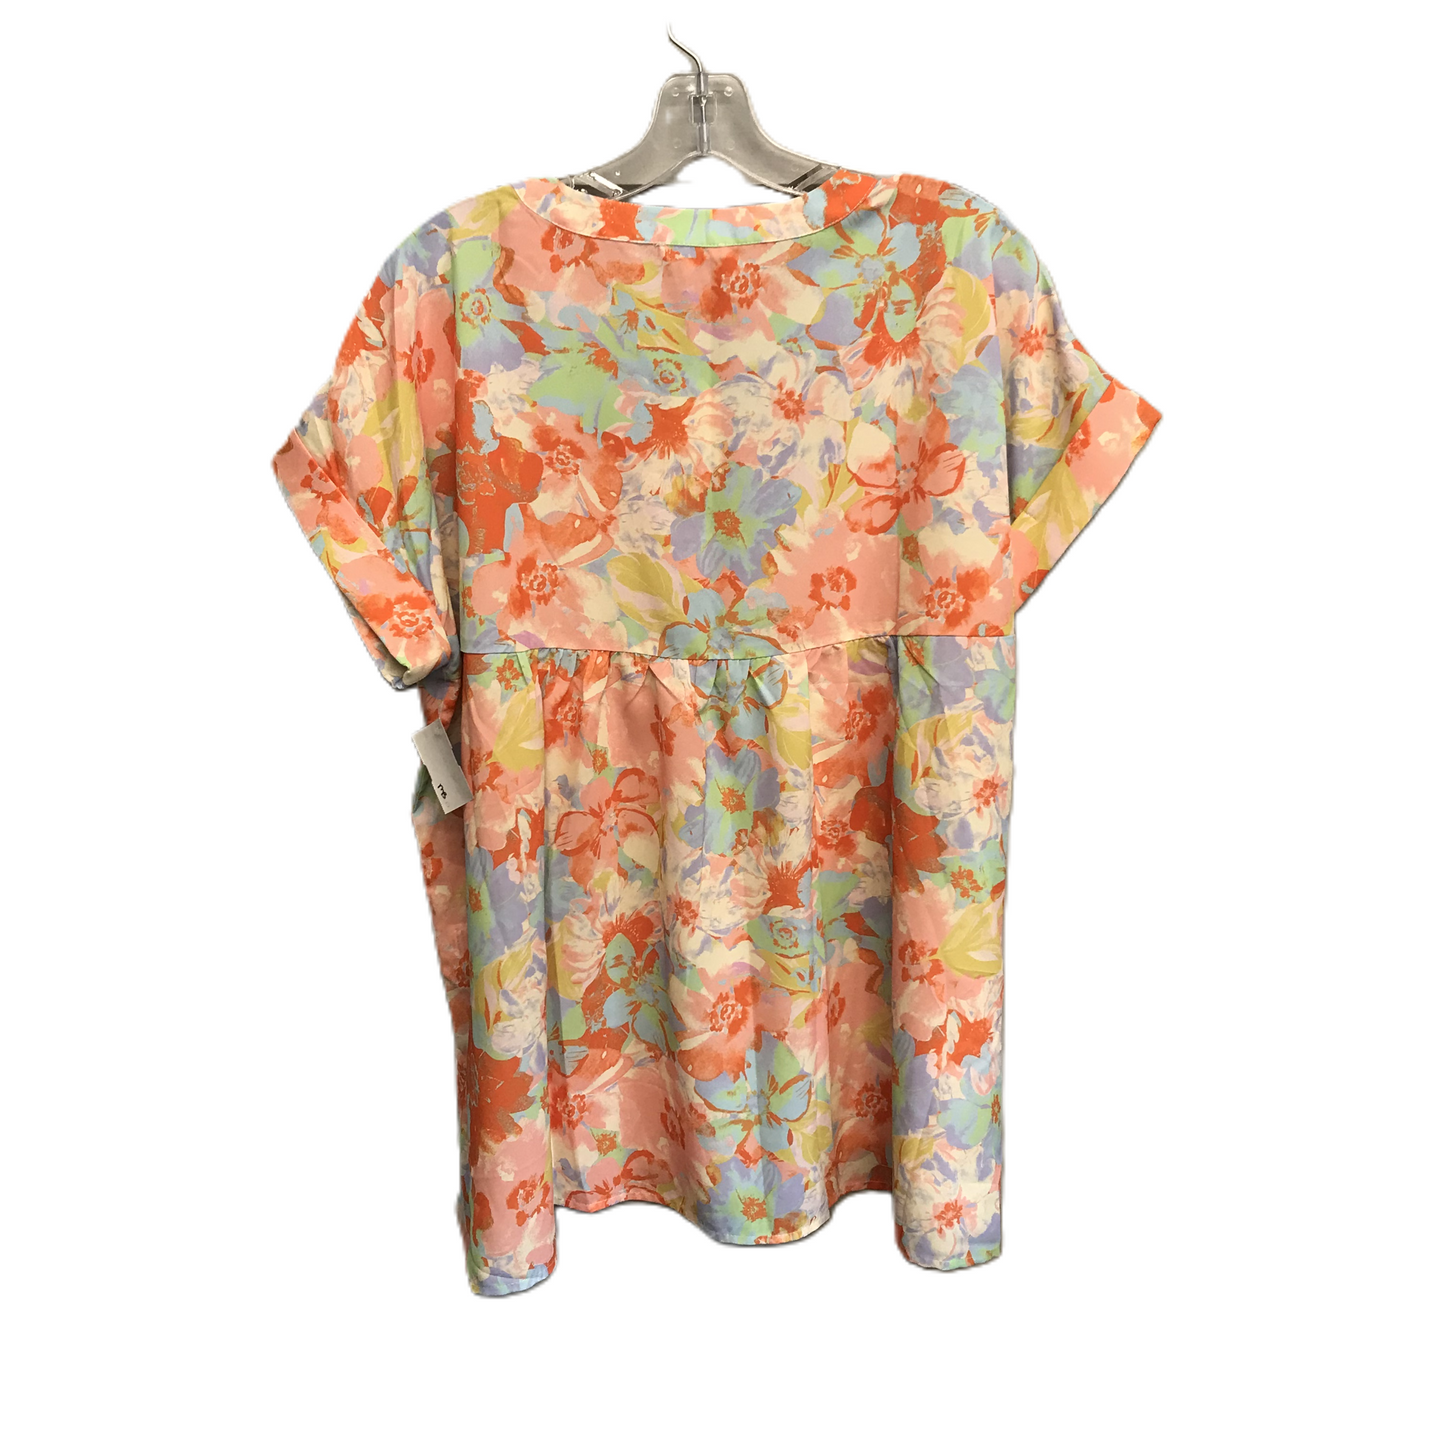 Floral Print Top Short Sleeve By Jodifl, Size: M